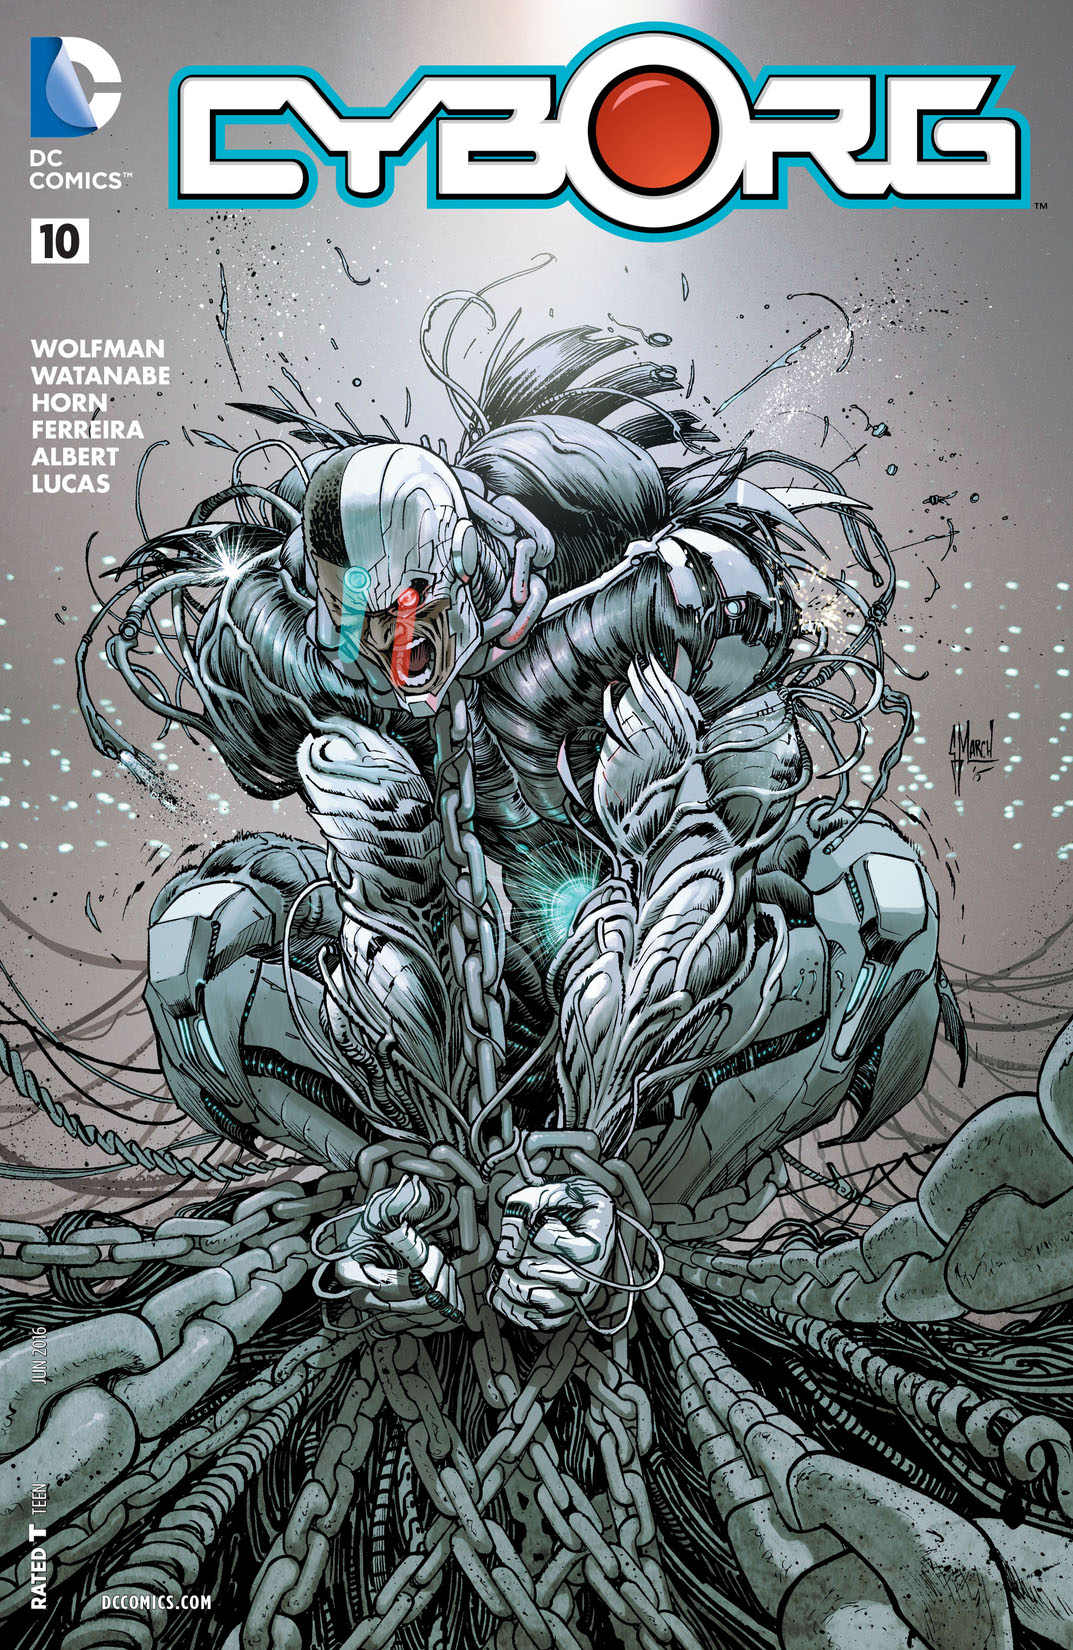 Cyborg (2015-) #10 preview images